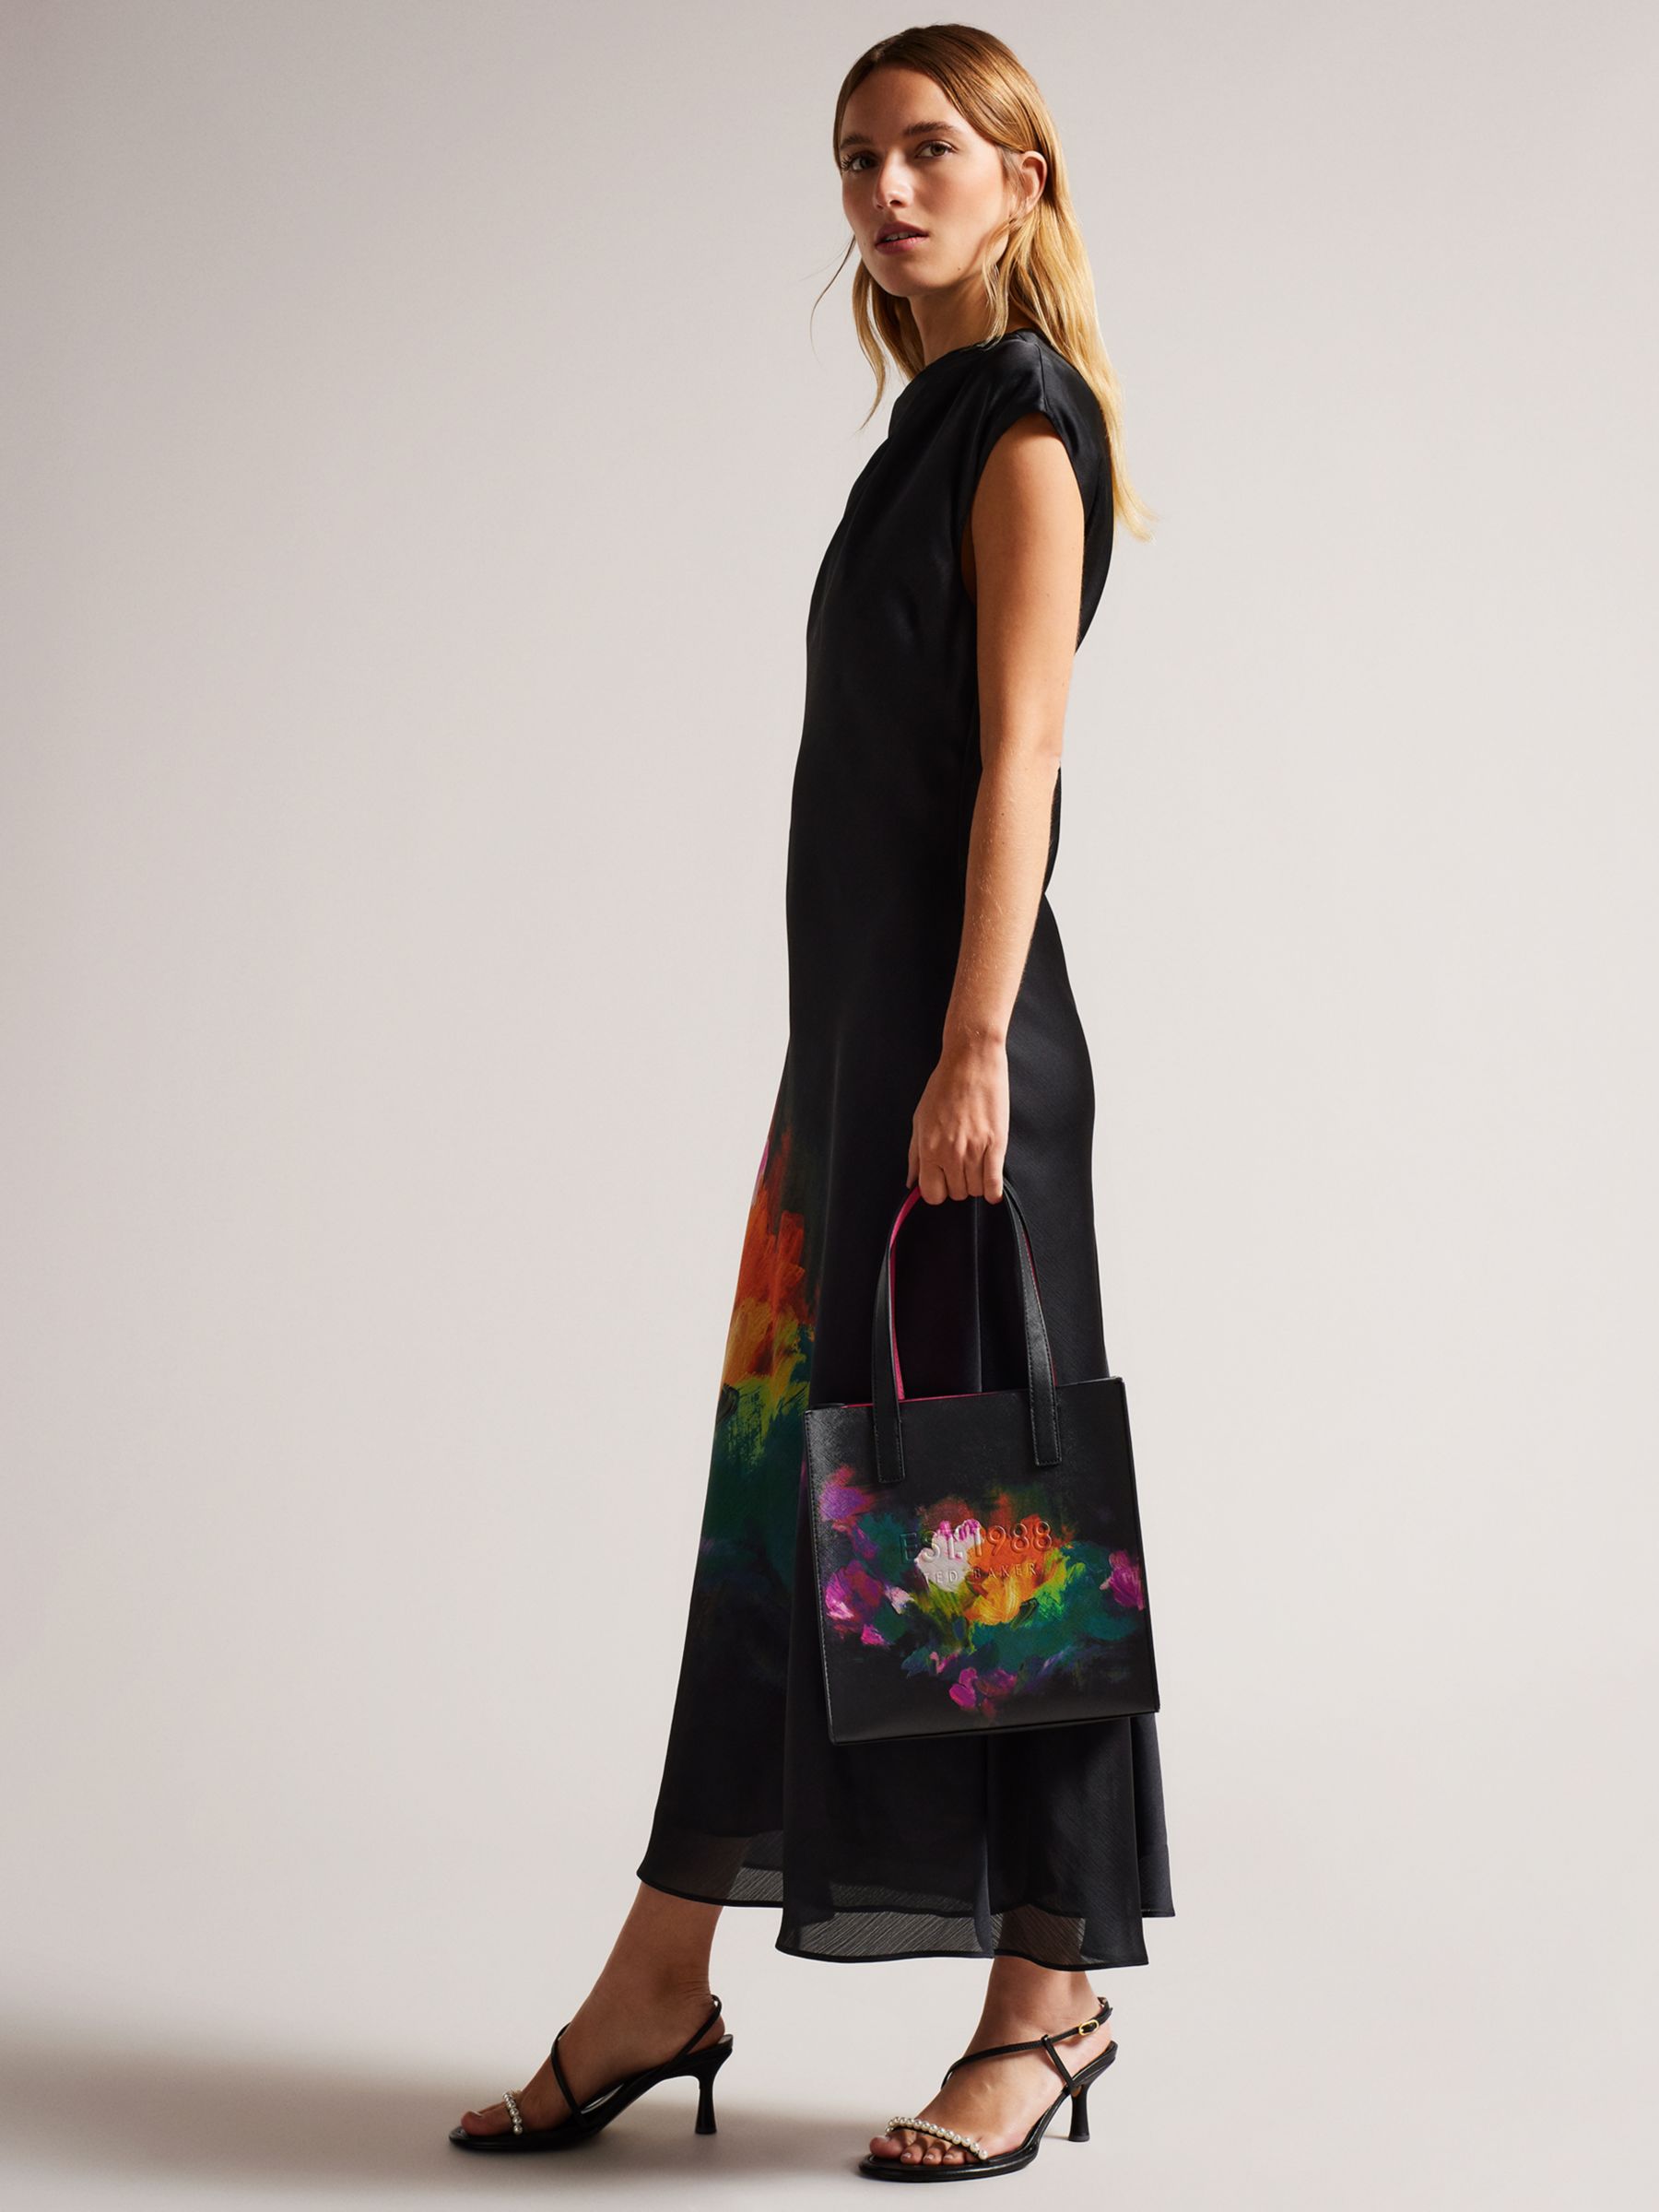 Ted Baker Paticon Floral Tote Bag, Black